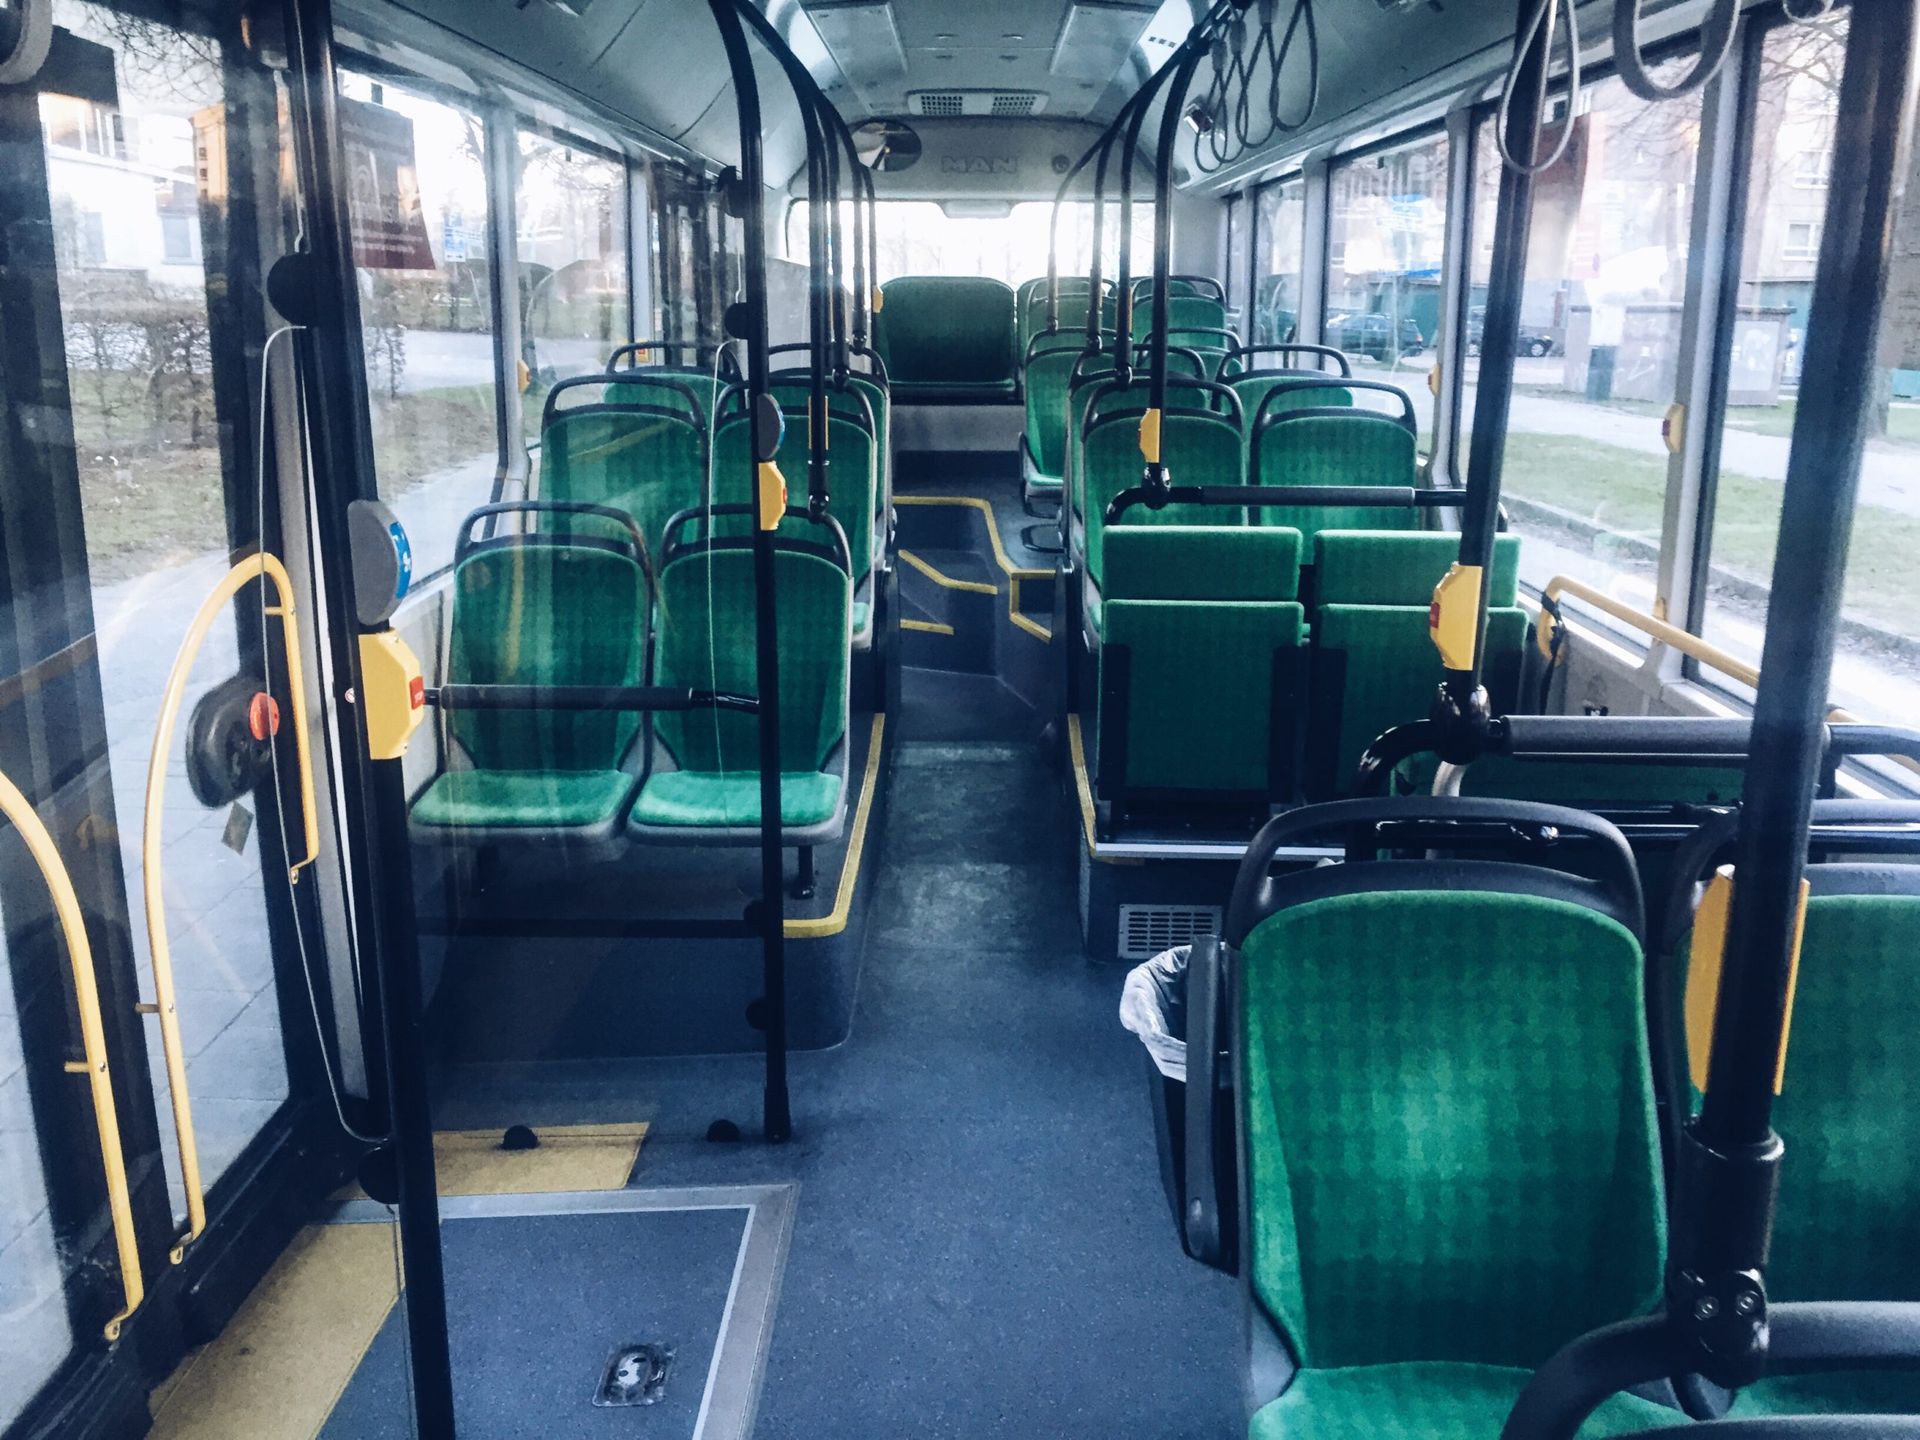 Empty seats on a bus.